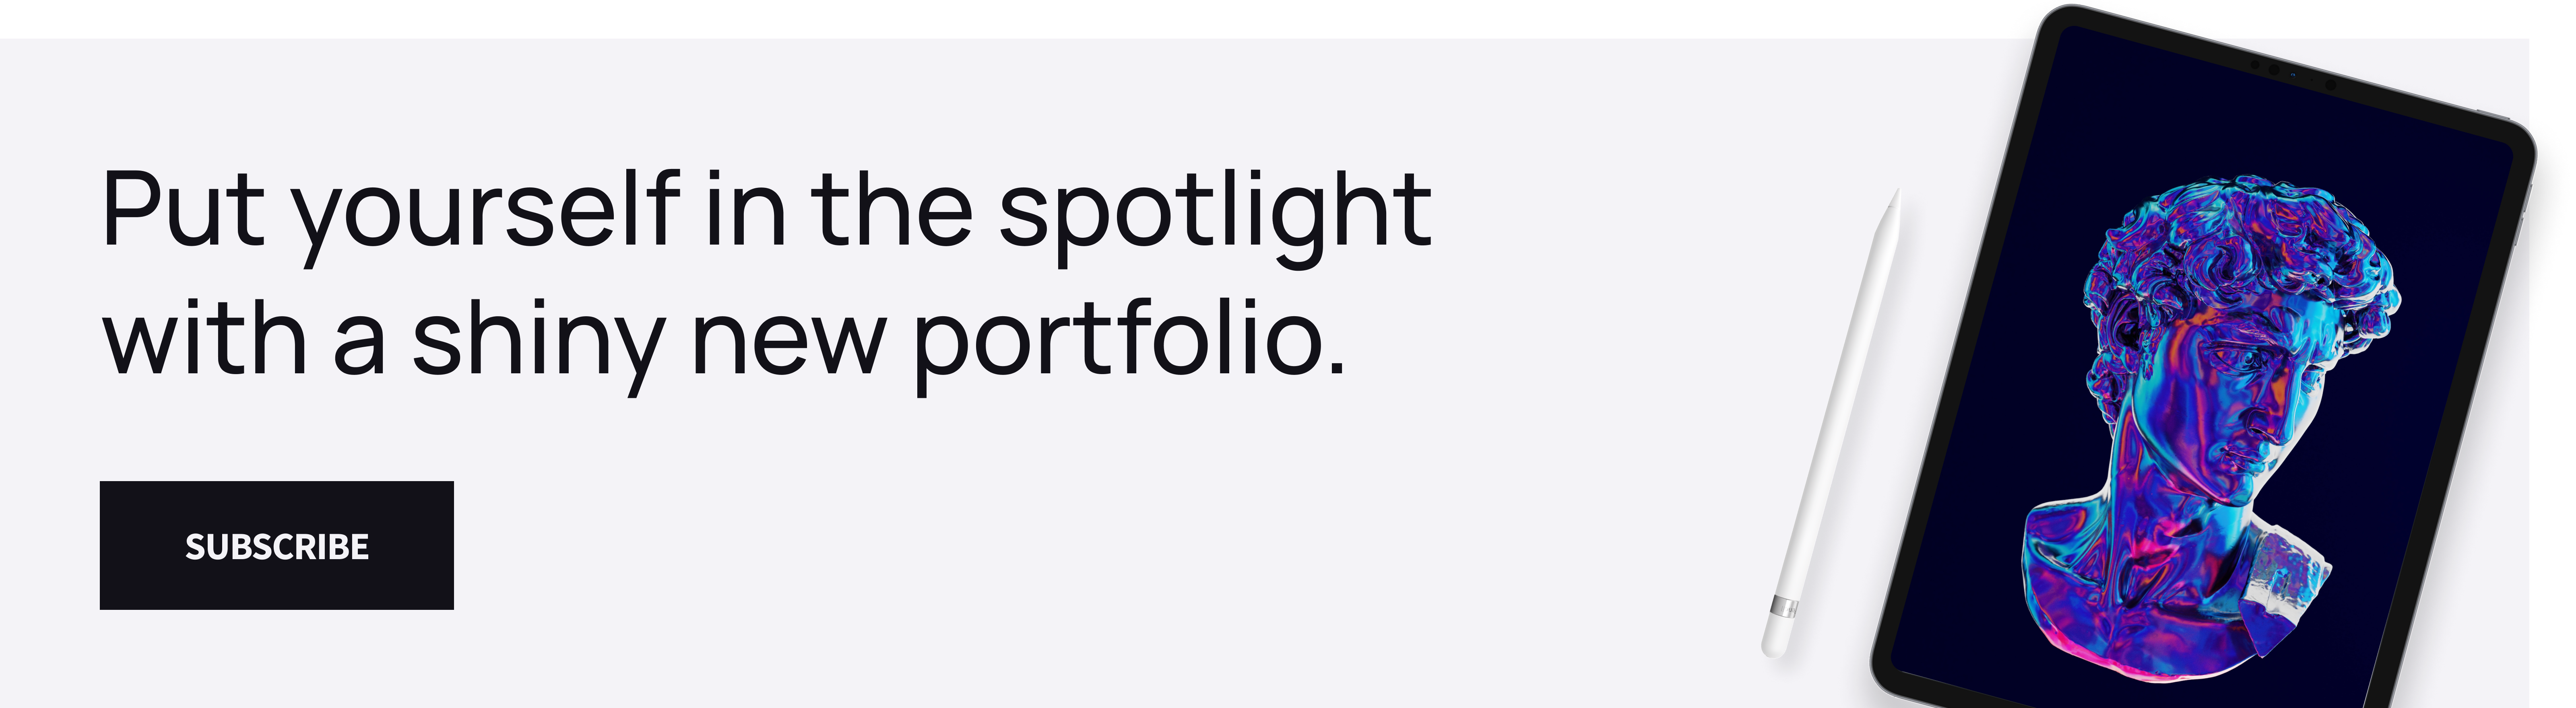 A banner saying "put yourself in the spotlight with a shiny new portfolio."